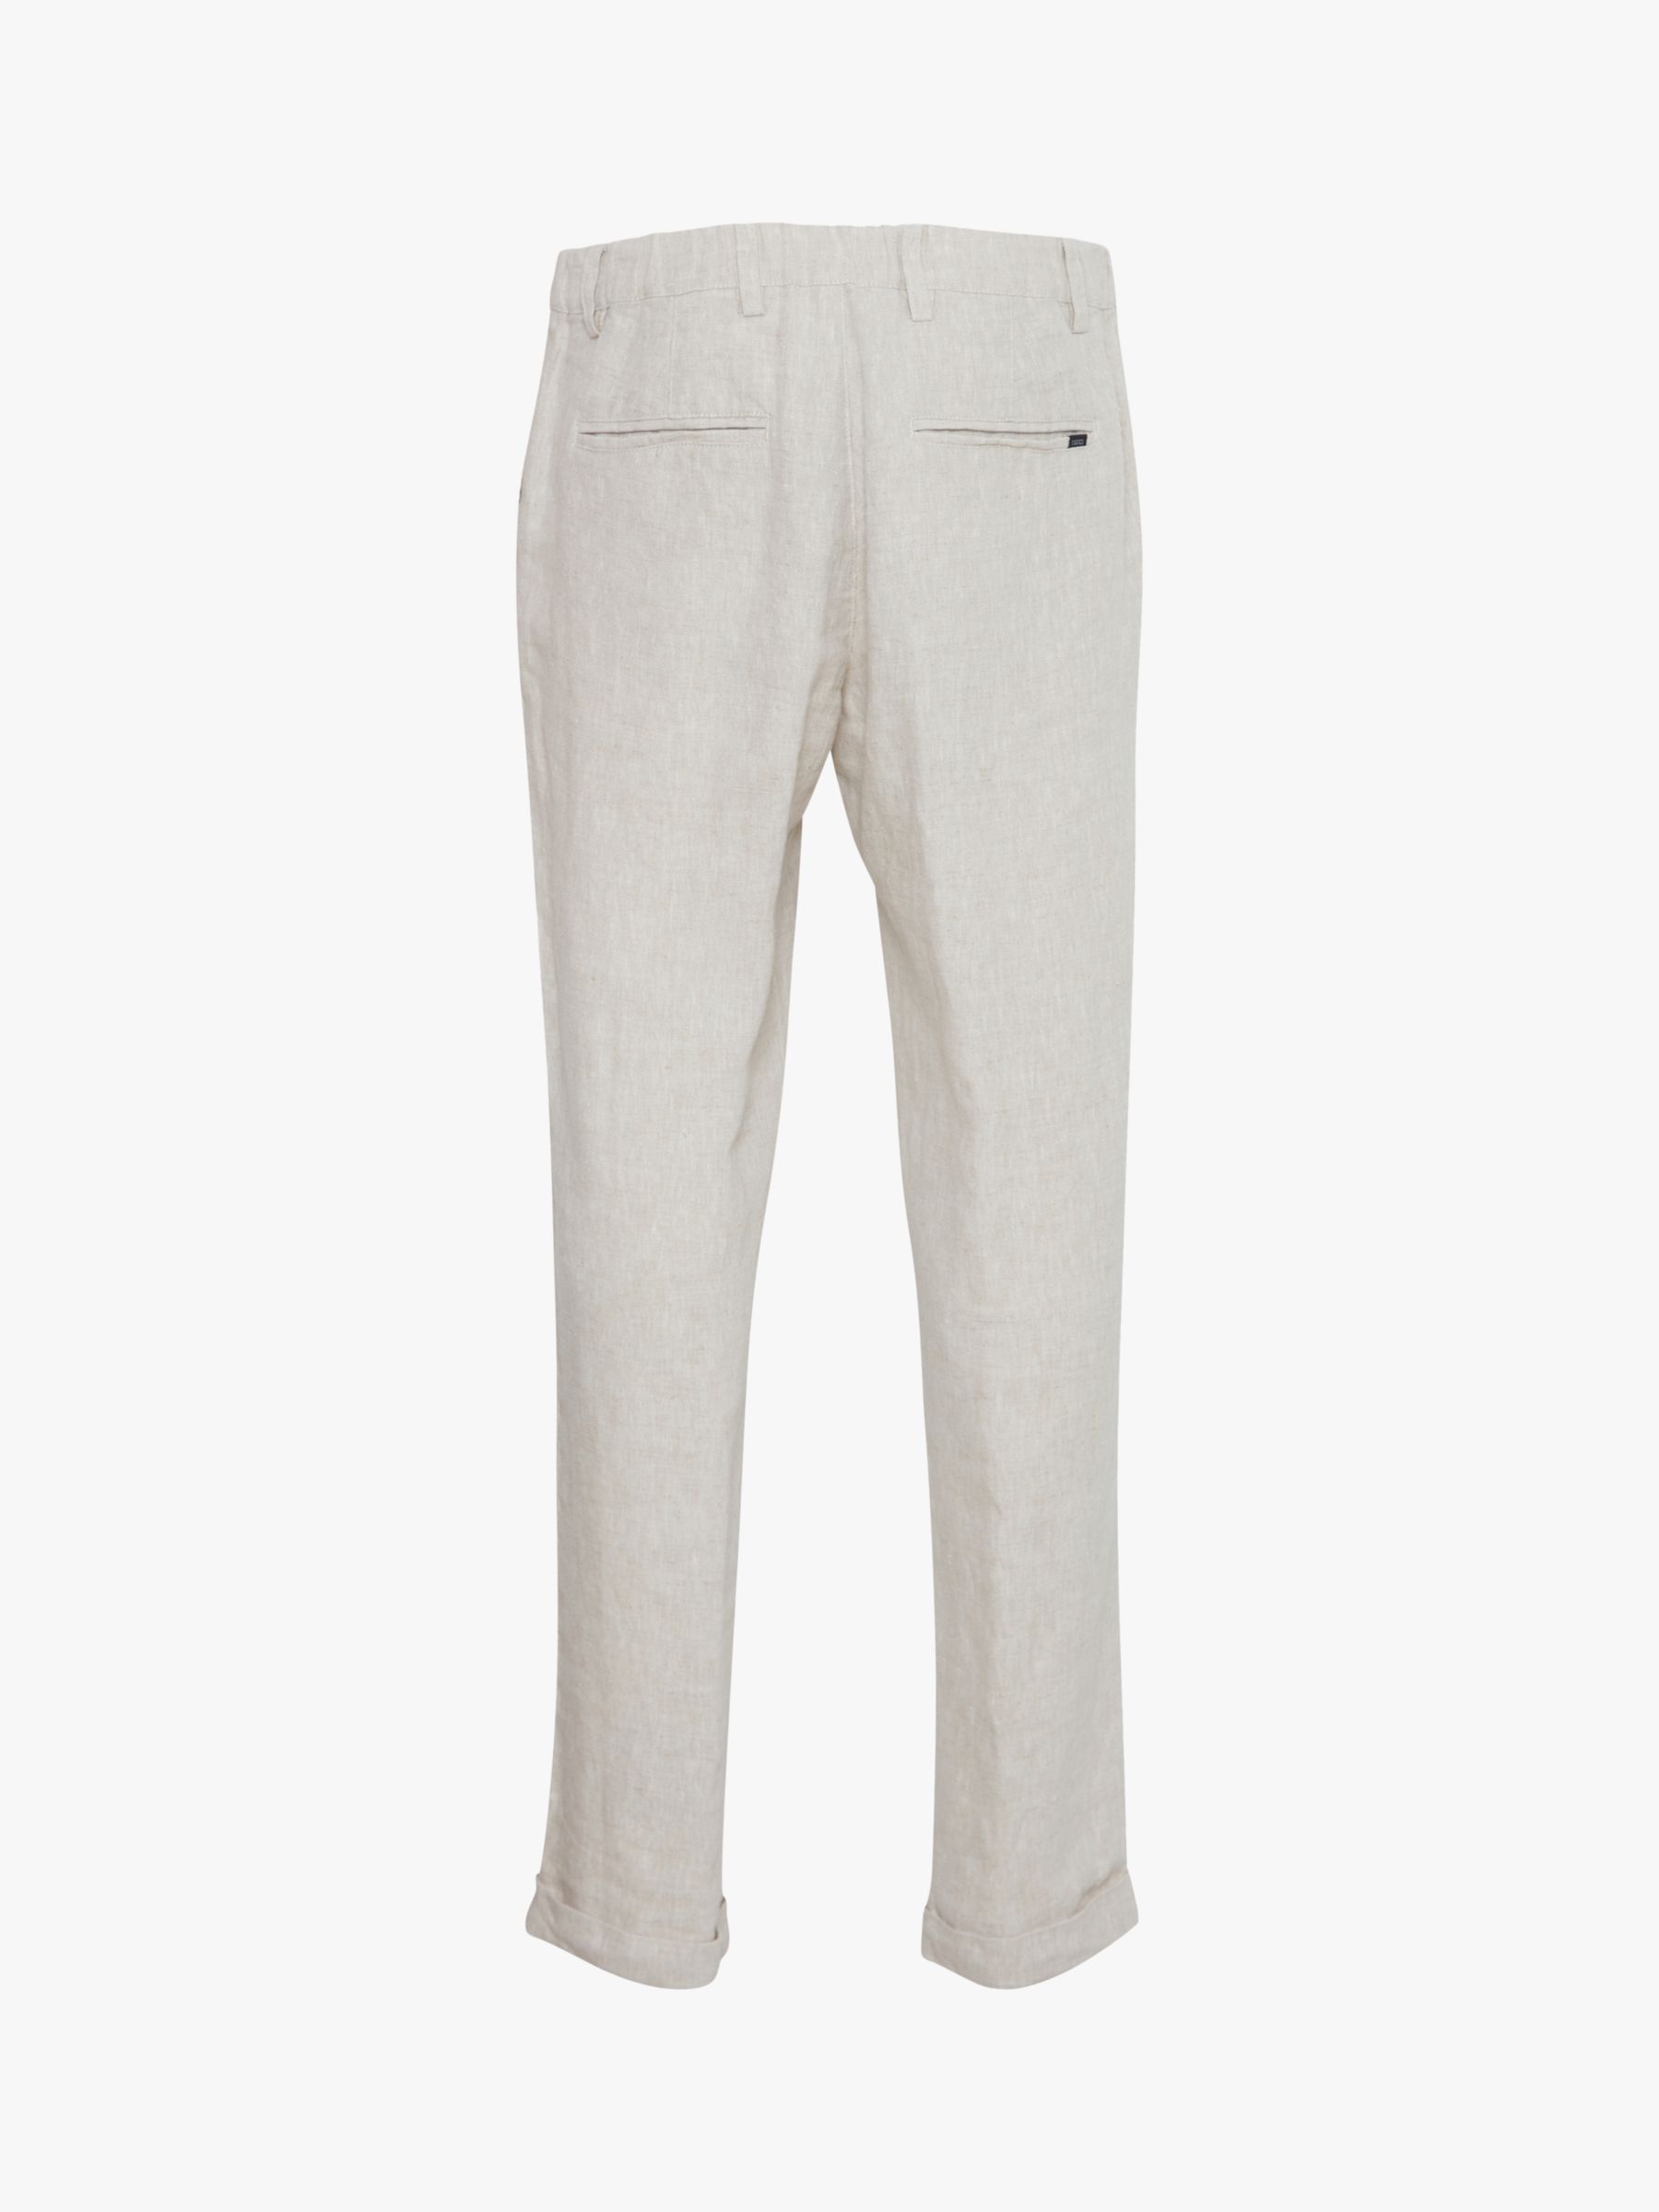 Casual Friday Pandrup Regular Fit Stretch Trousers, Chateau Gray, 28R